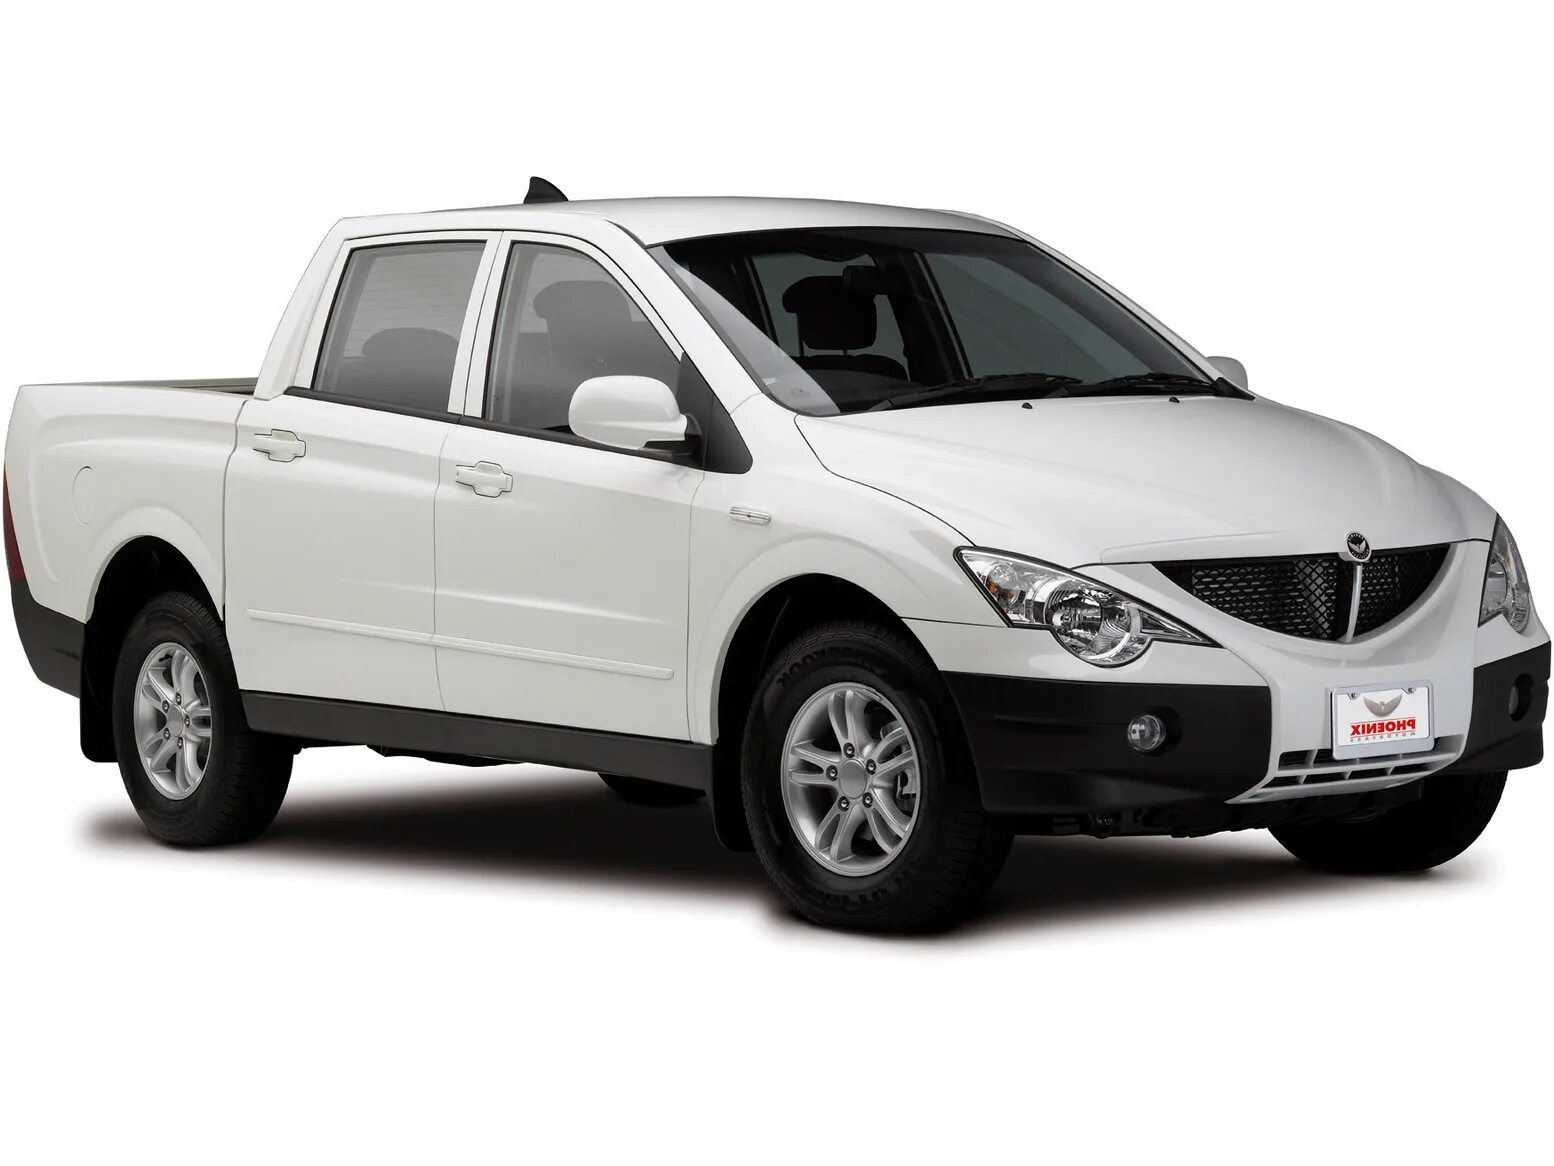 Ssangyong actyon sport 2012. SSANGYONG Actyon Sports 2006. SSANGYONG Actyon Sports 2010. SSANGYONG Actyon 2005. SSANGYONG Actyon Sports 2012.